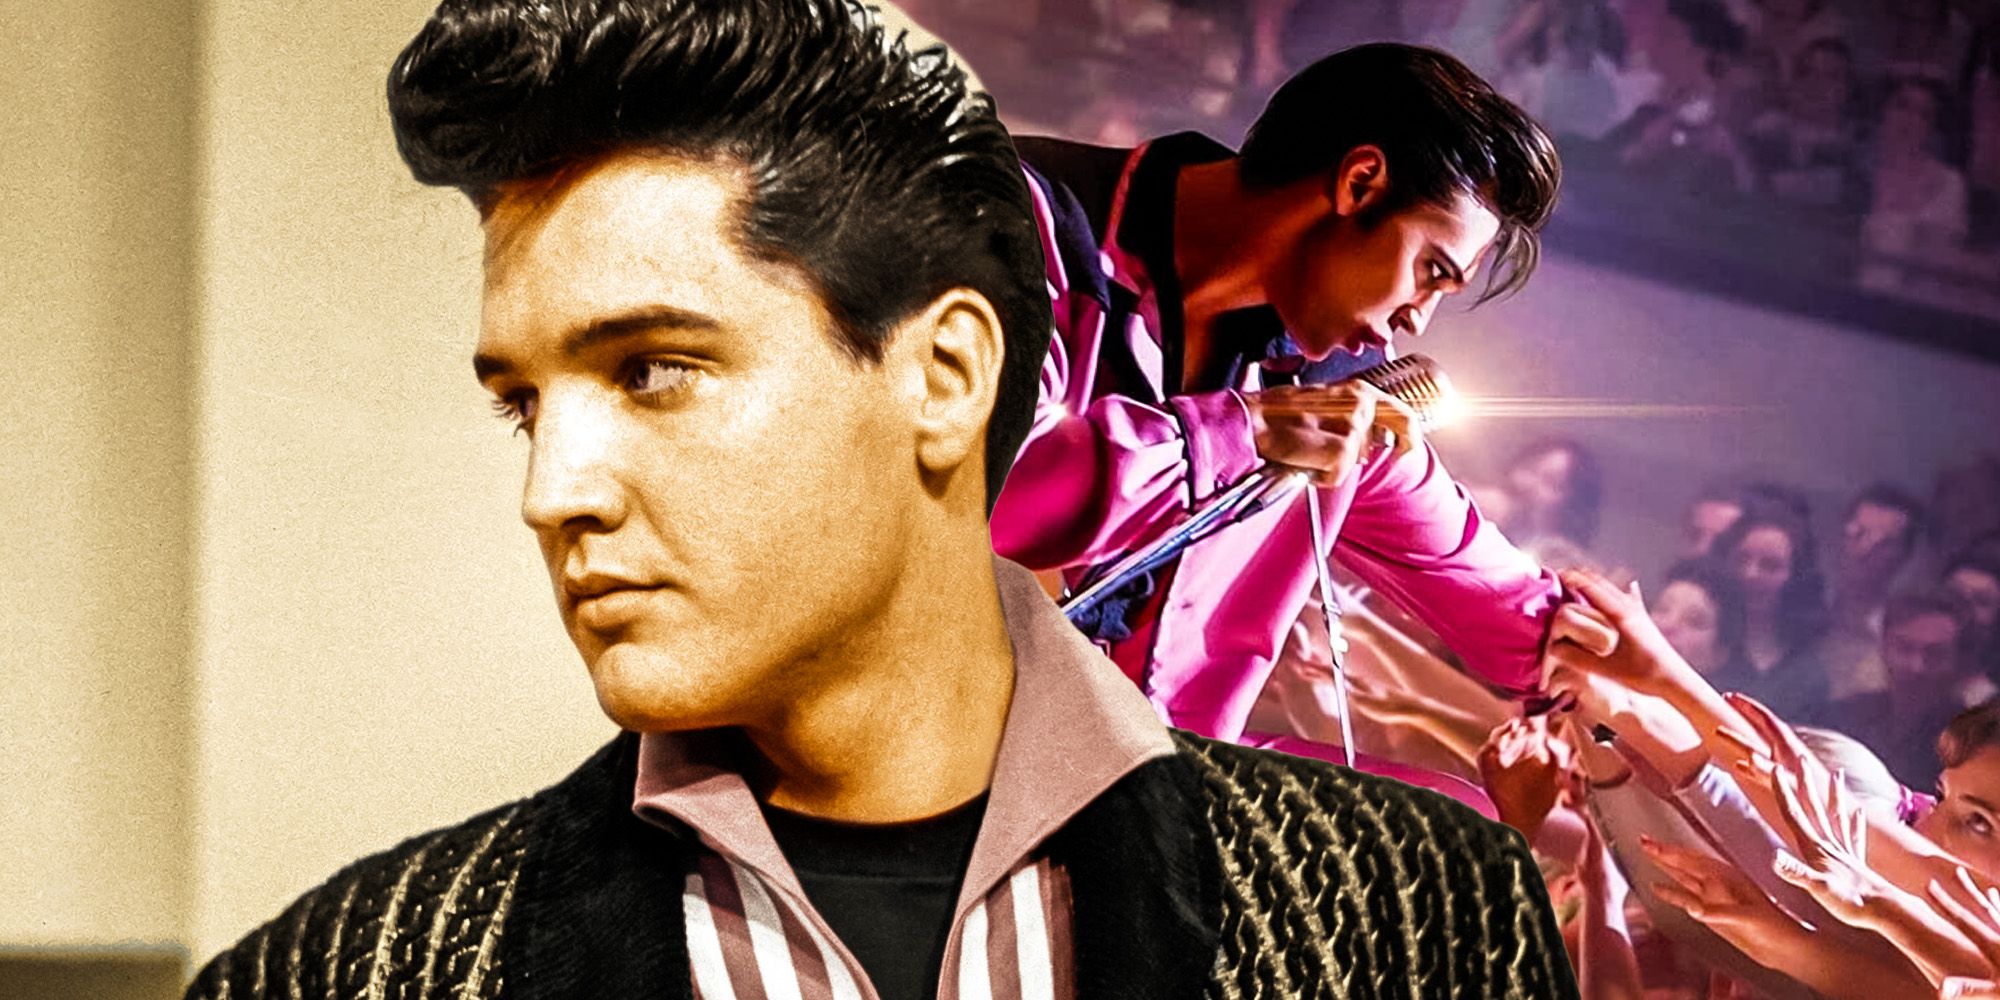 Elvis true story how accurate is the movie